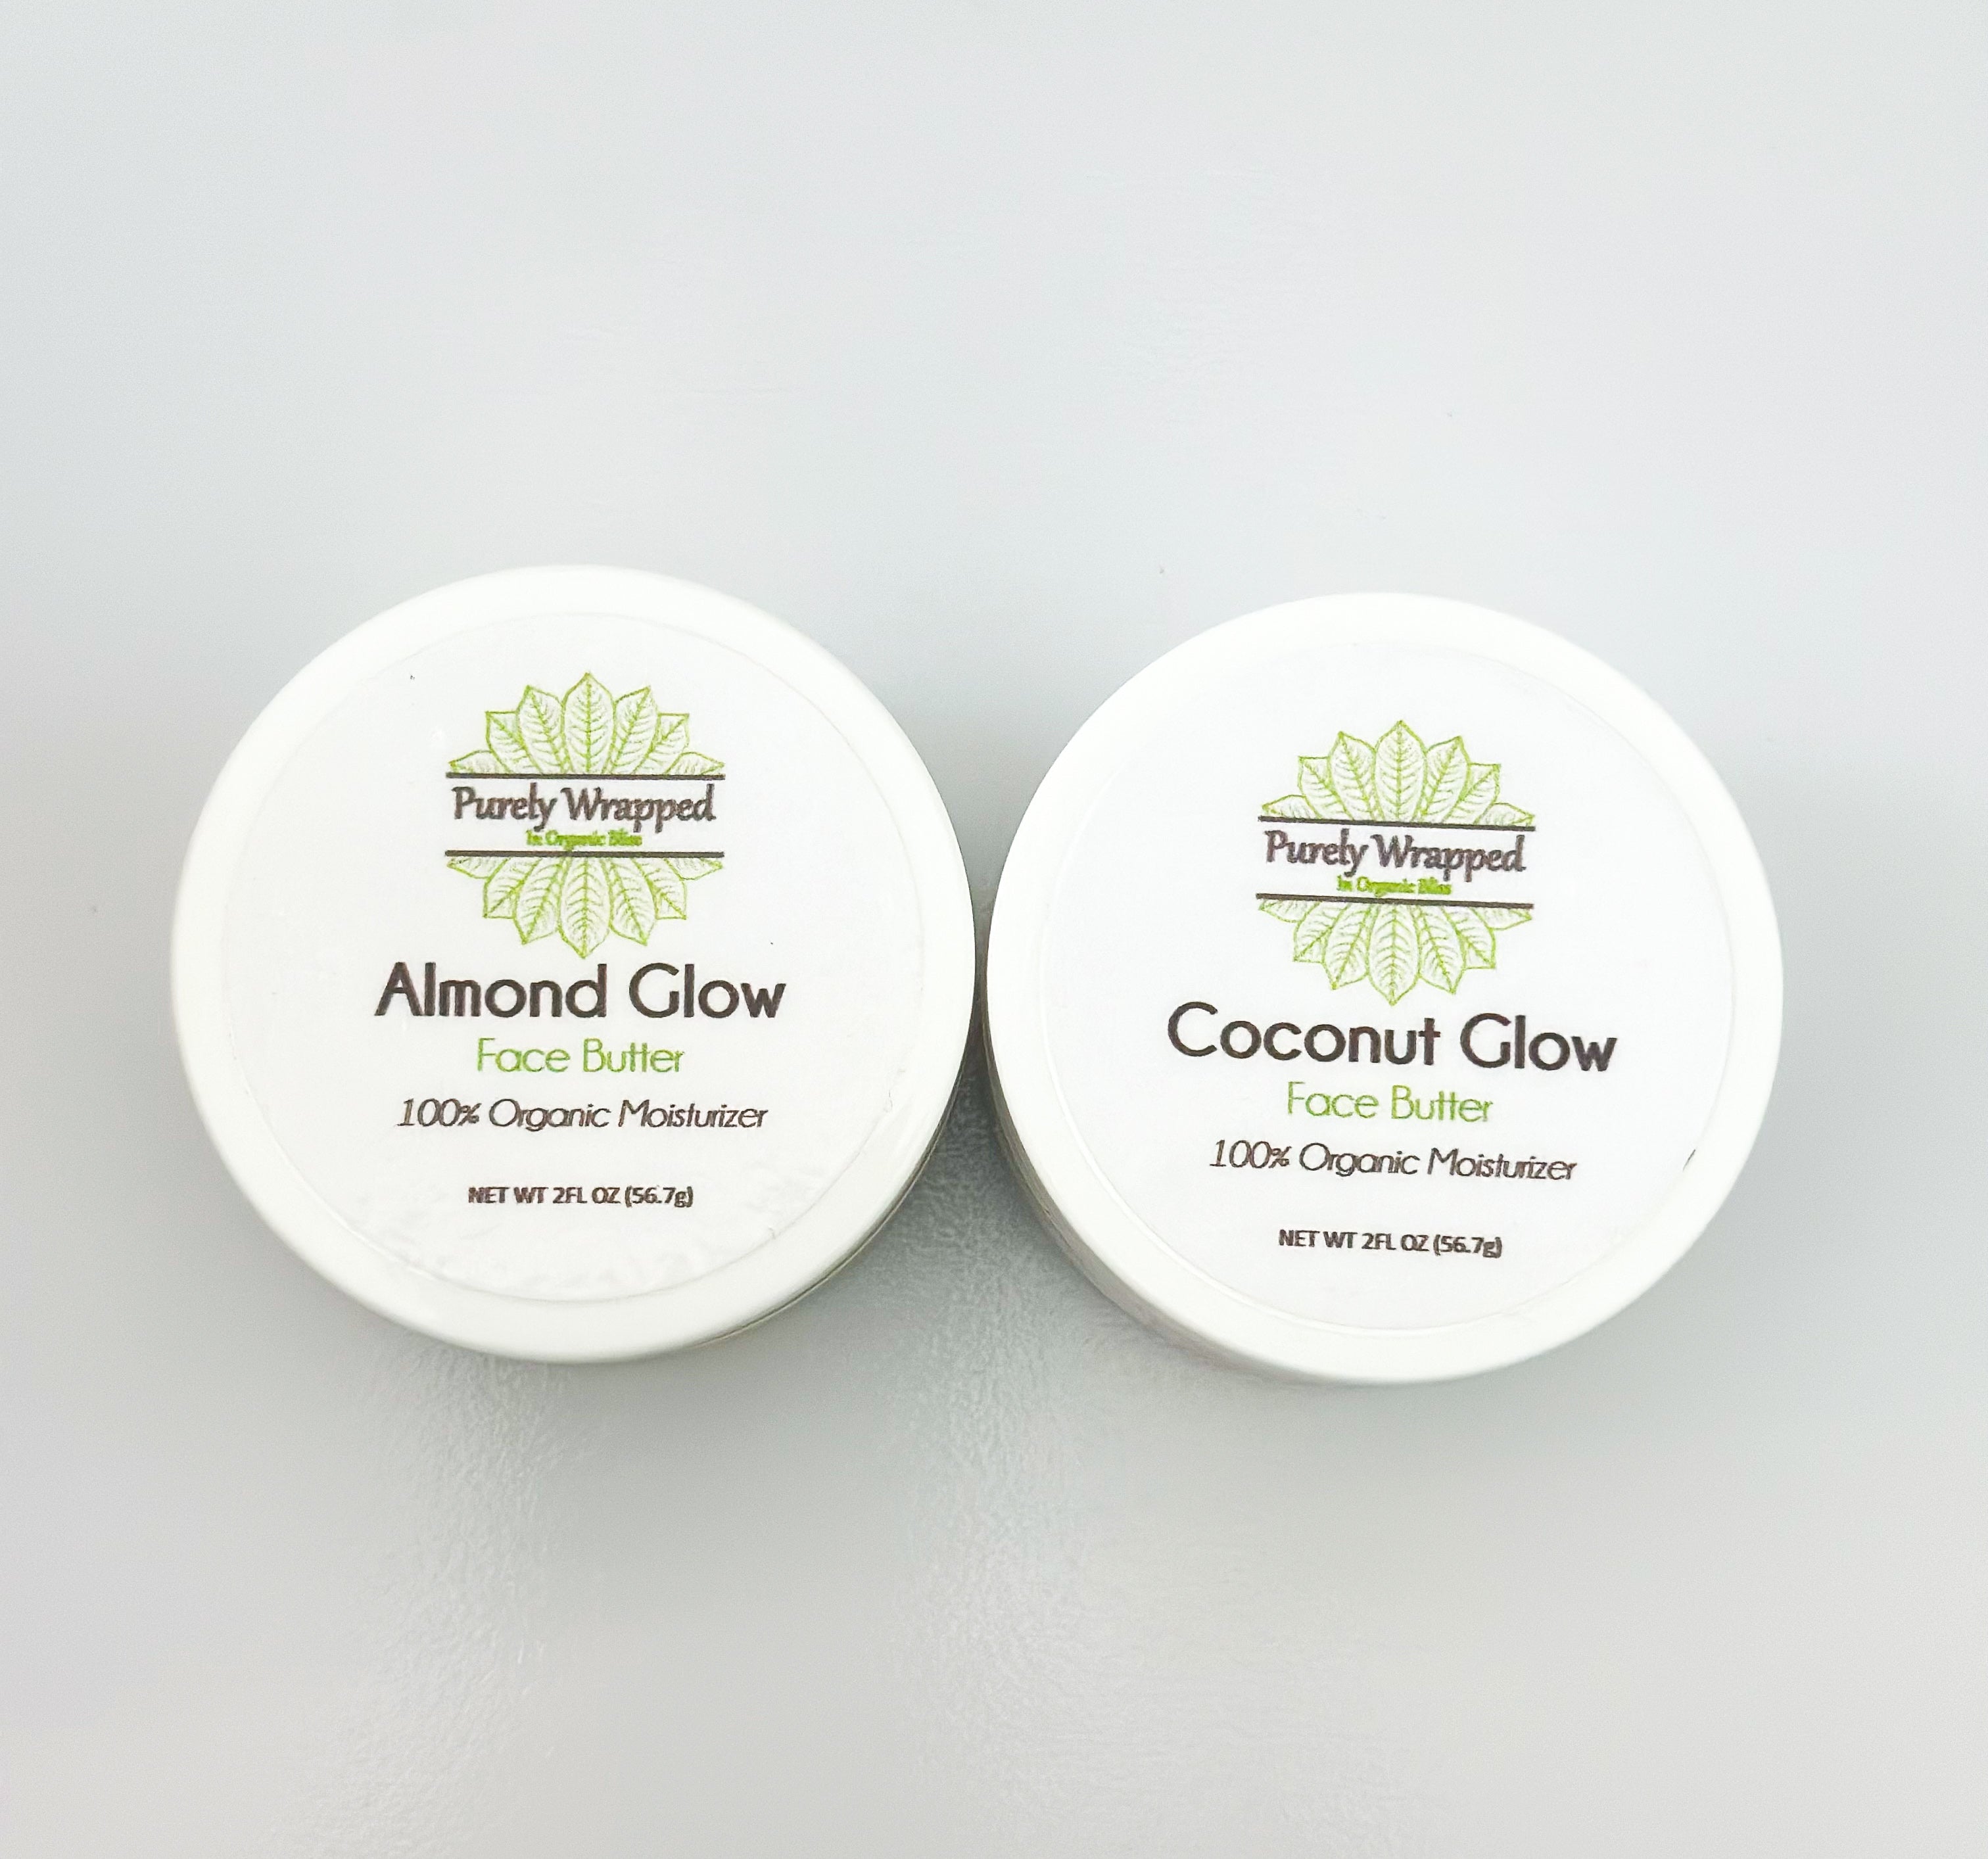 Coconut Glow Face butter